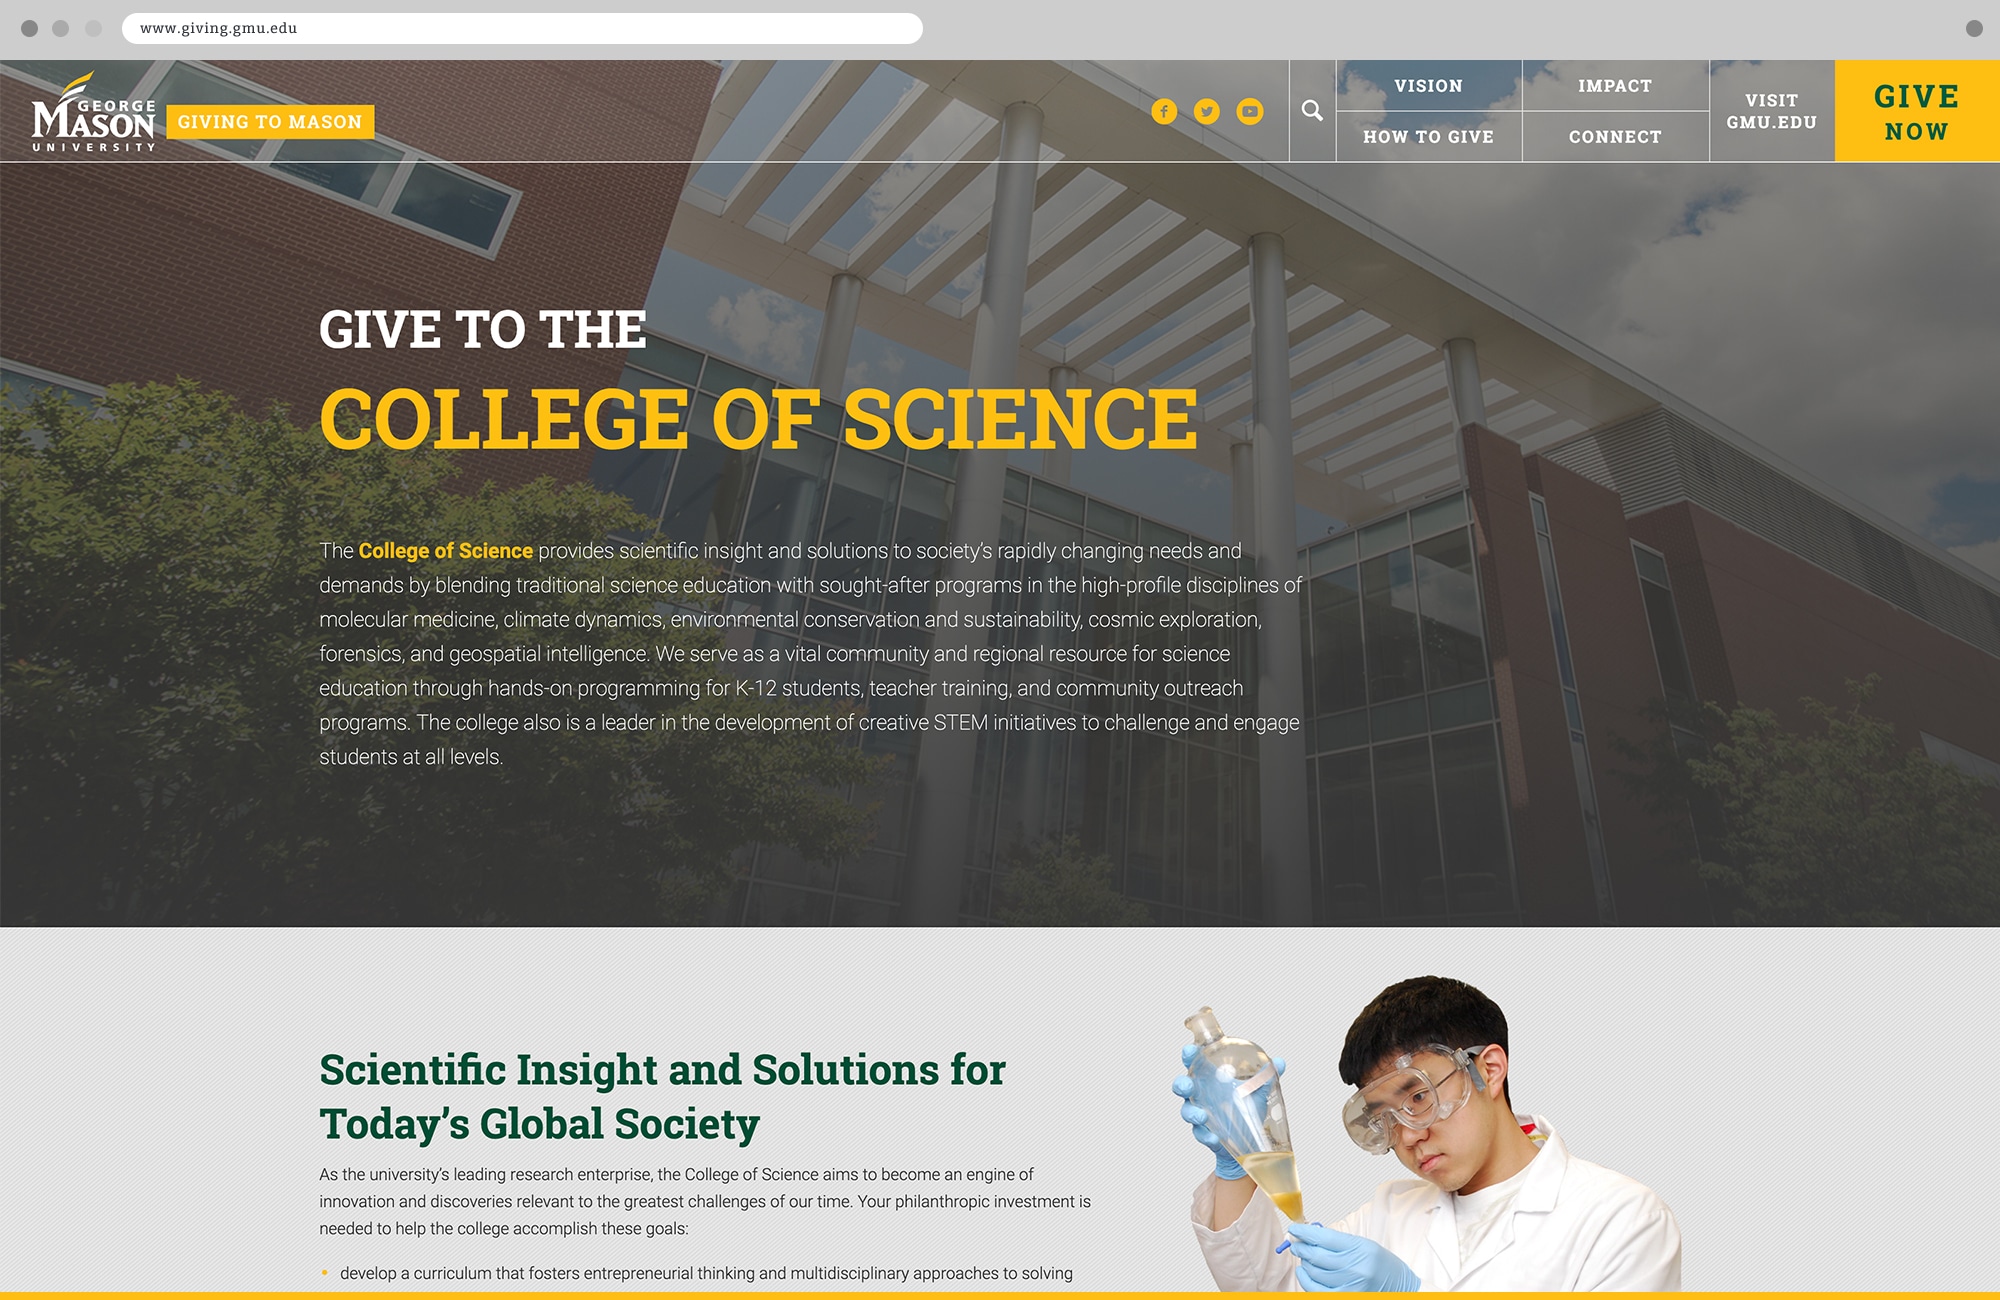 Punch - George Mason University Giving to the College of Science Page